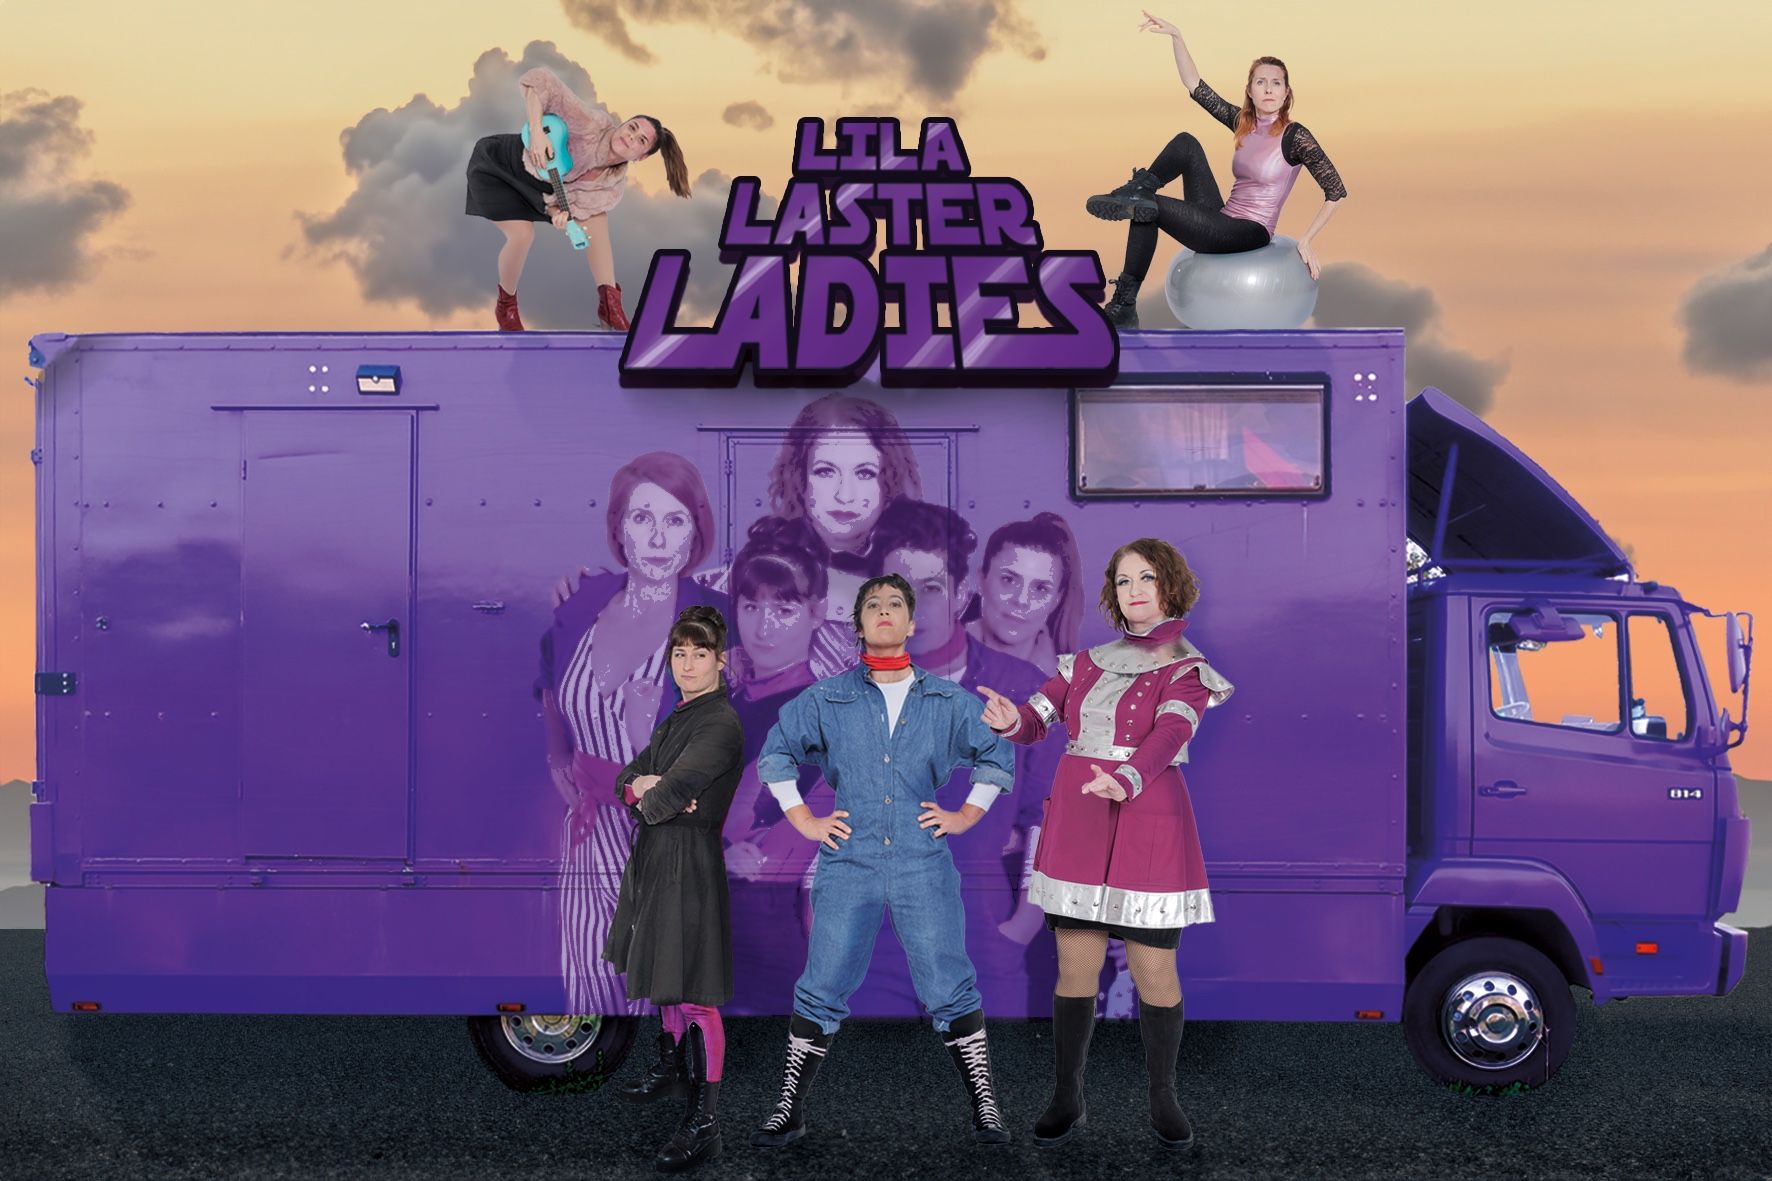 You can see a group of women* in front of a purple truck.